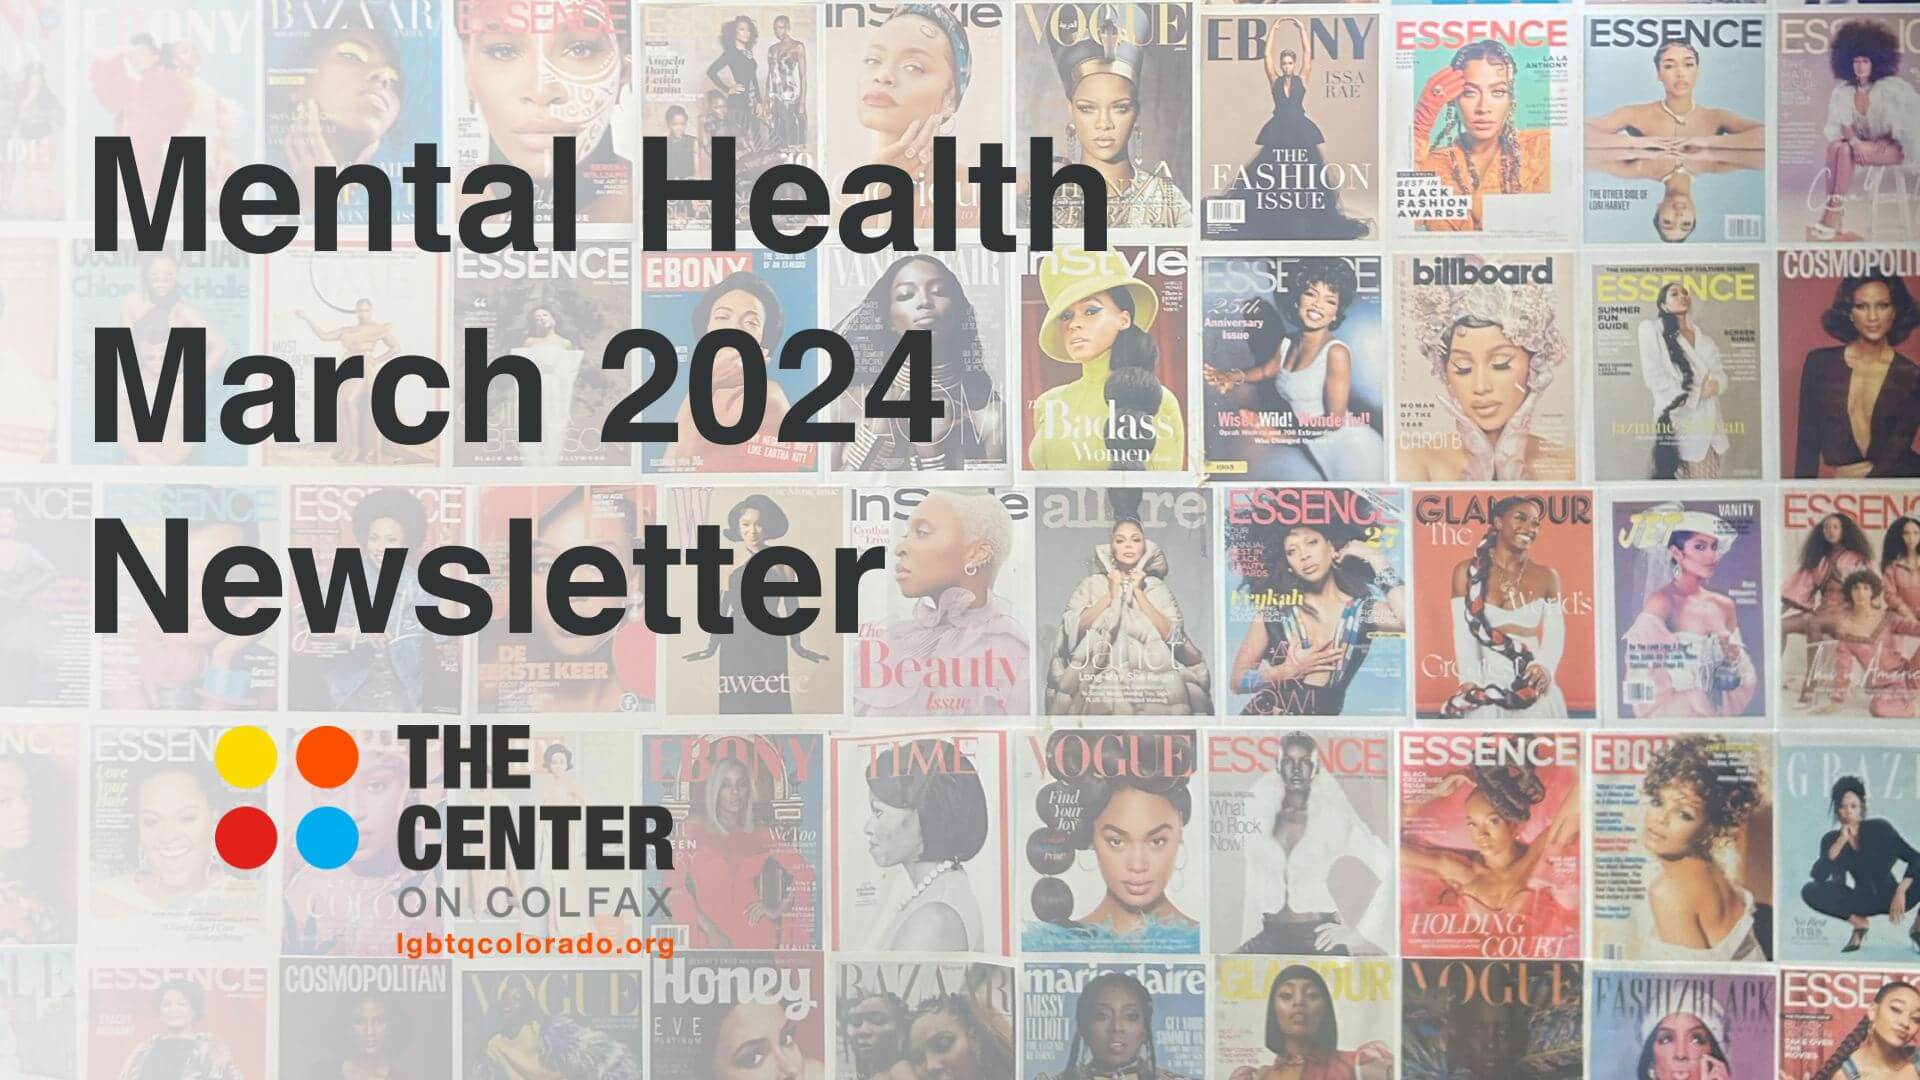 "Mental Health March 2024 Newsletter" and The Center on Colfax Logo overlaid atop a photo from the Museum for Black Girls field trip